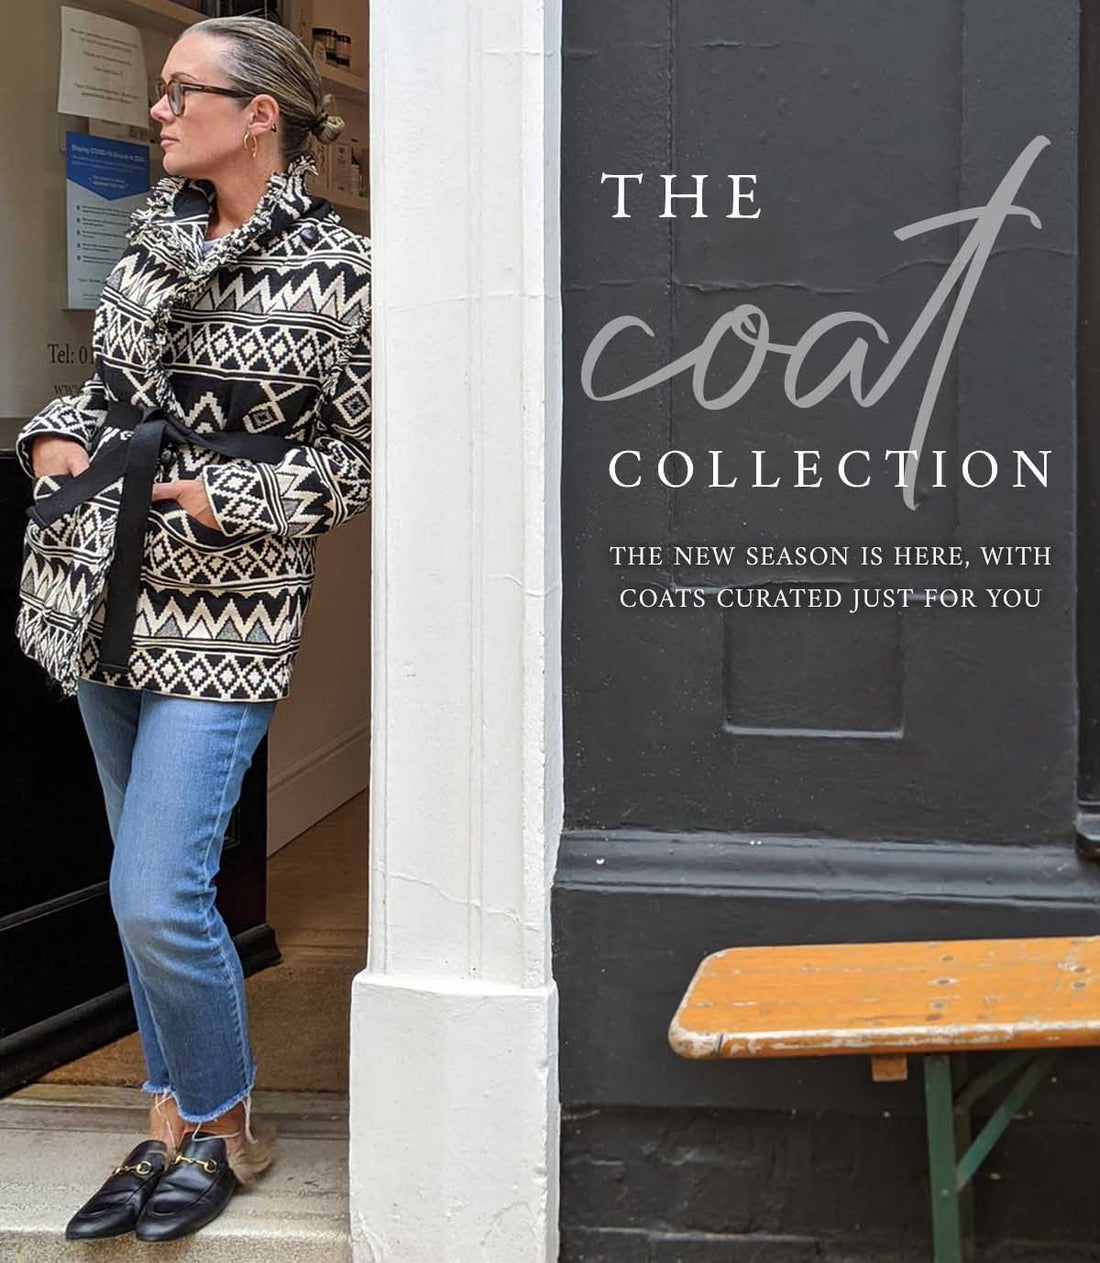 The Coat Collection